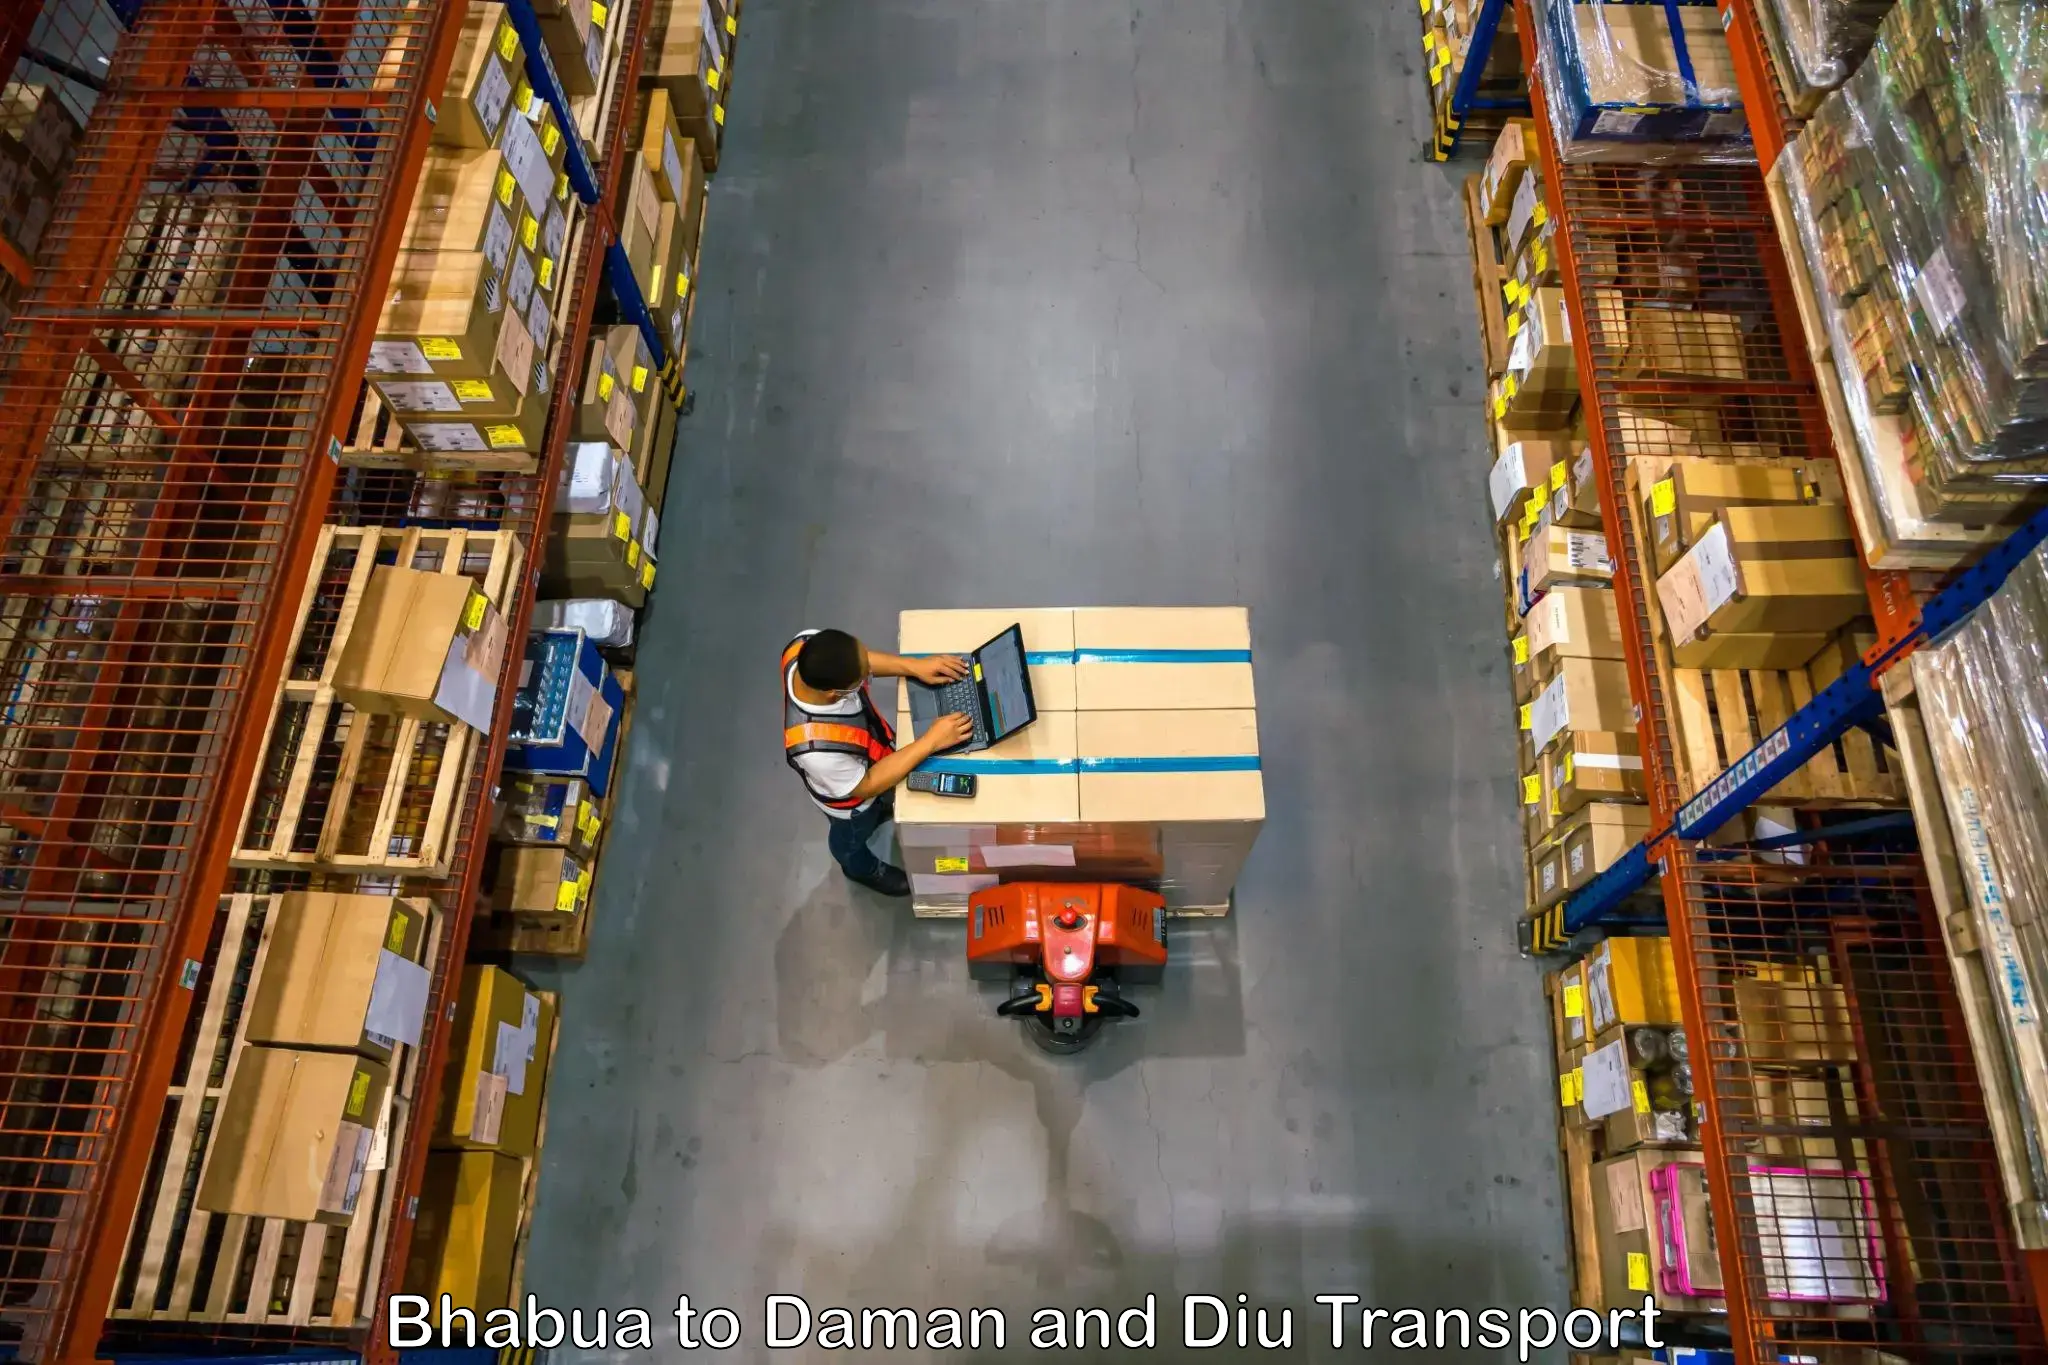 Transport bike from one state to another Bhabua to Daman and Diu